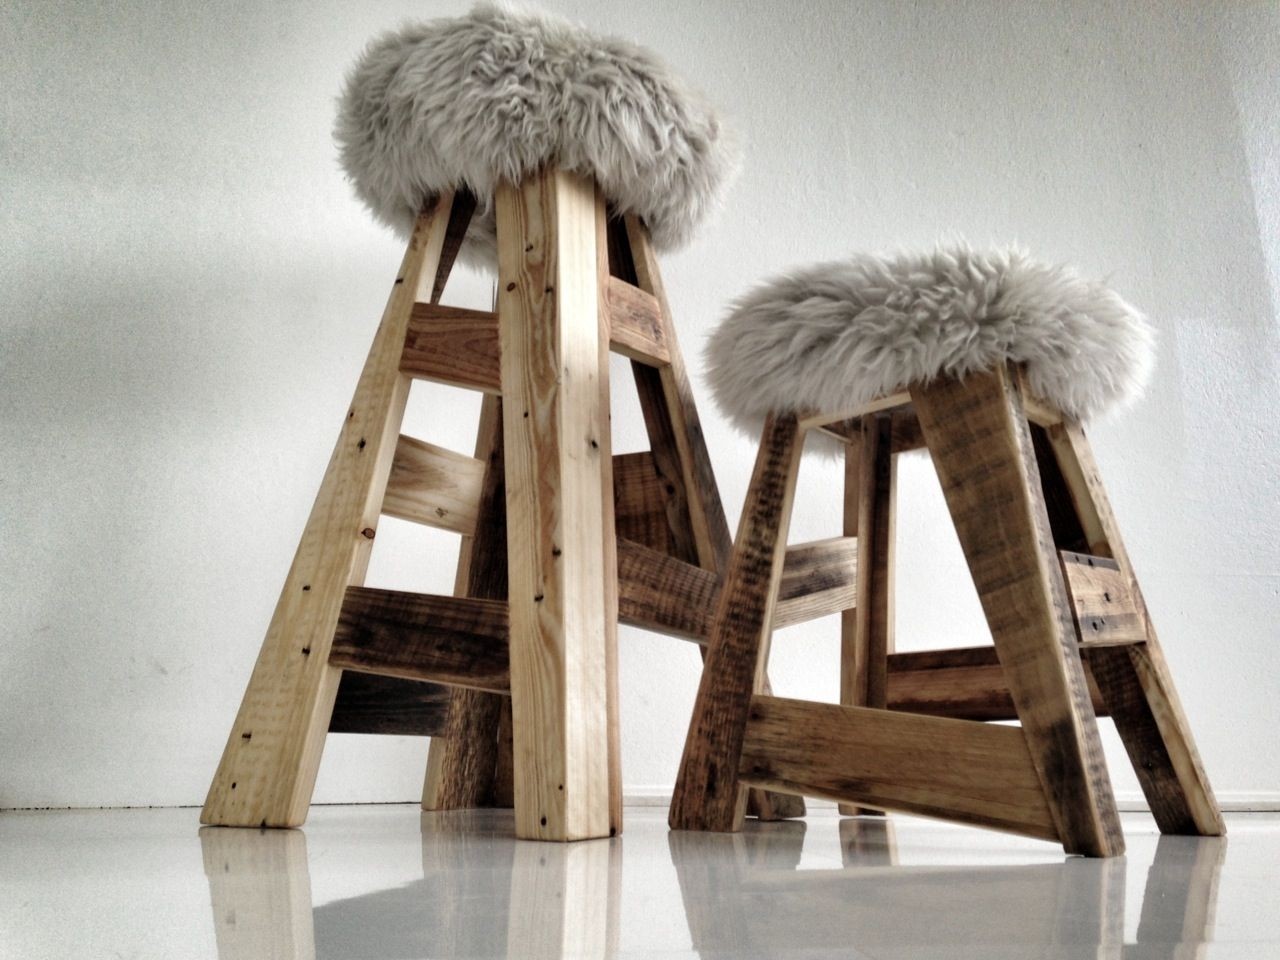 Pallet stools with fur so cosy for winter